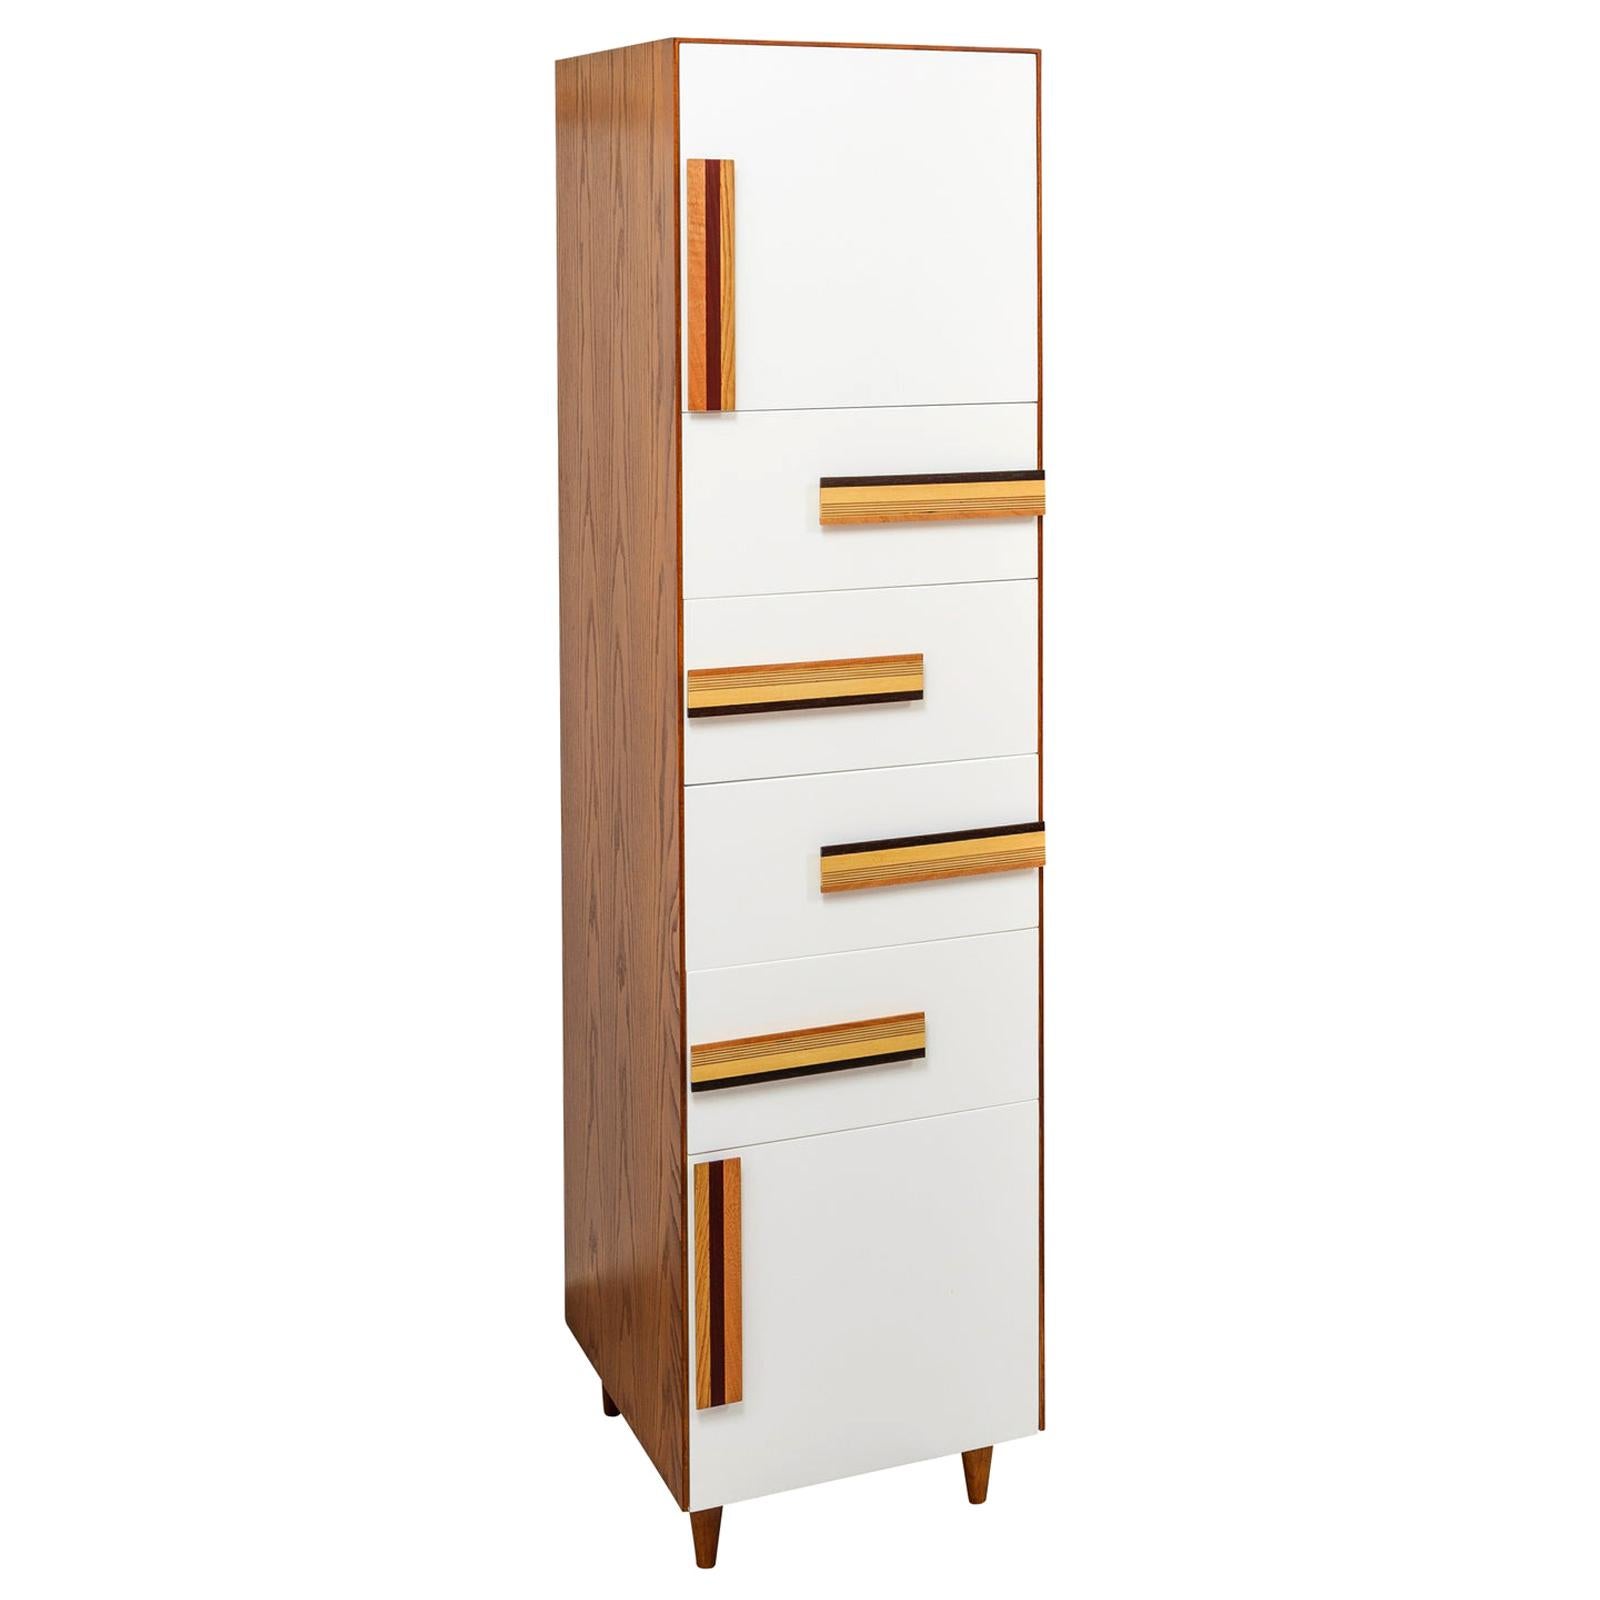 Waite on Cabinet by Tropica Design